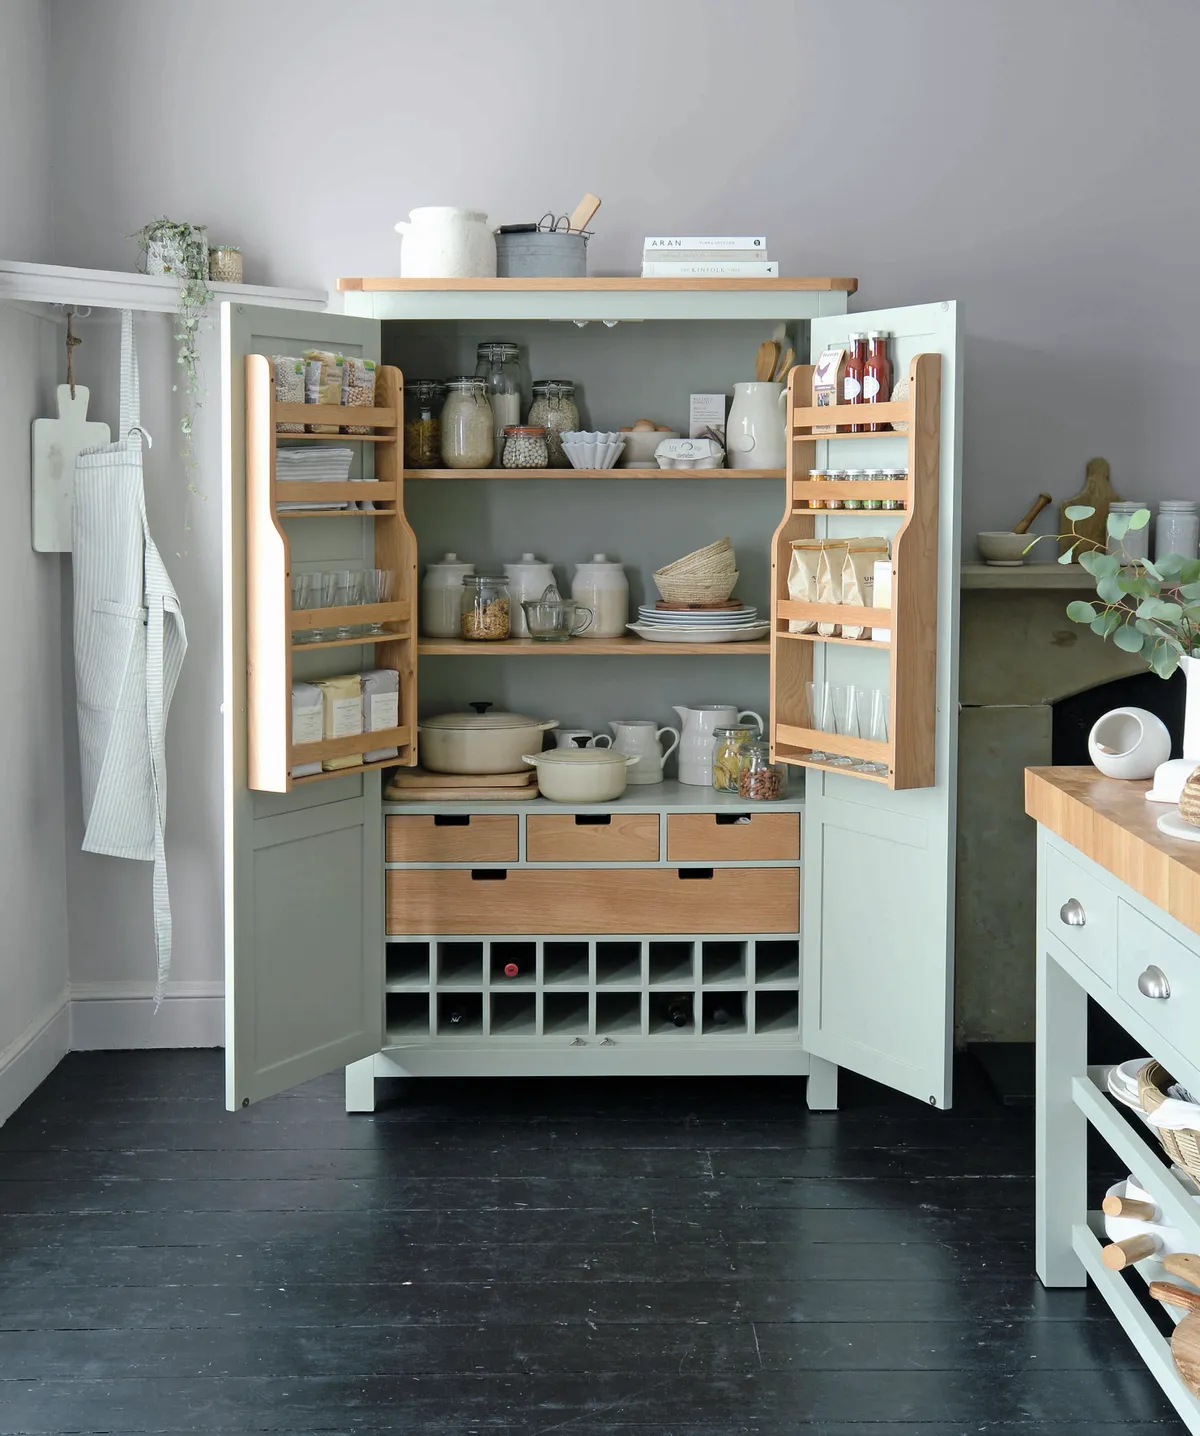 Sussex double larder in Sage green £1,099, The Cotswold Company